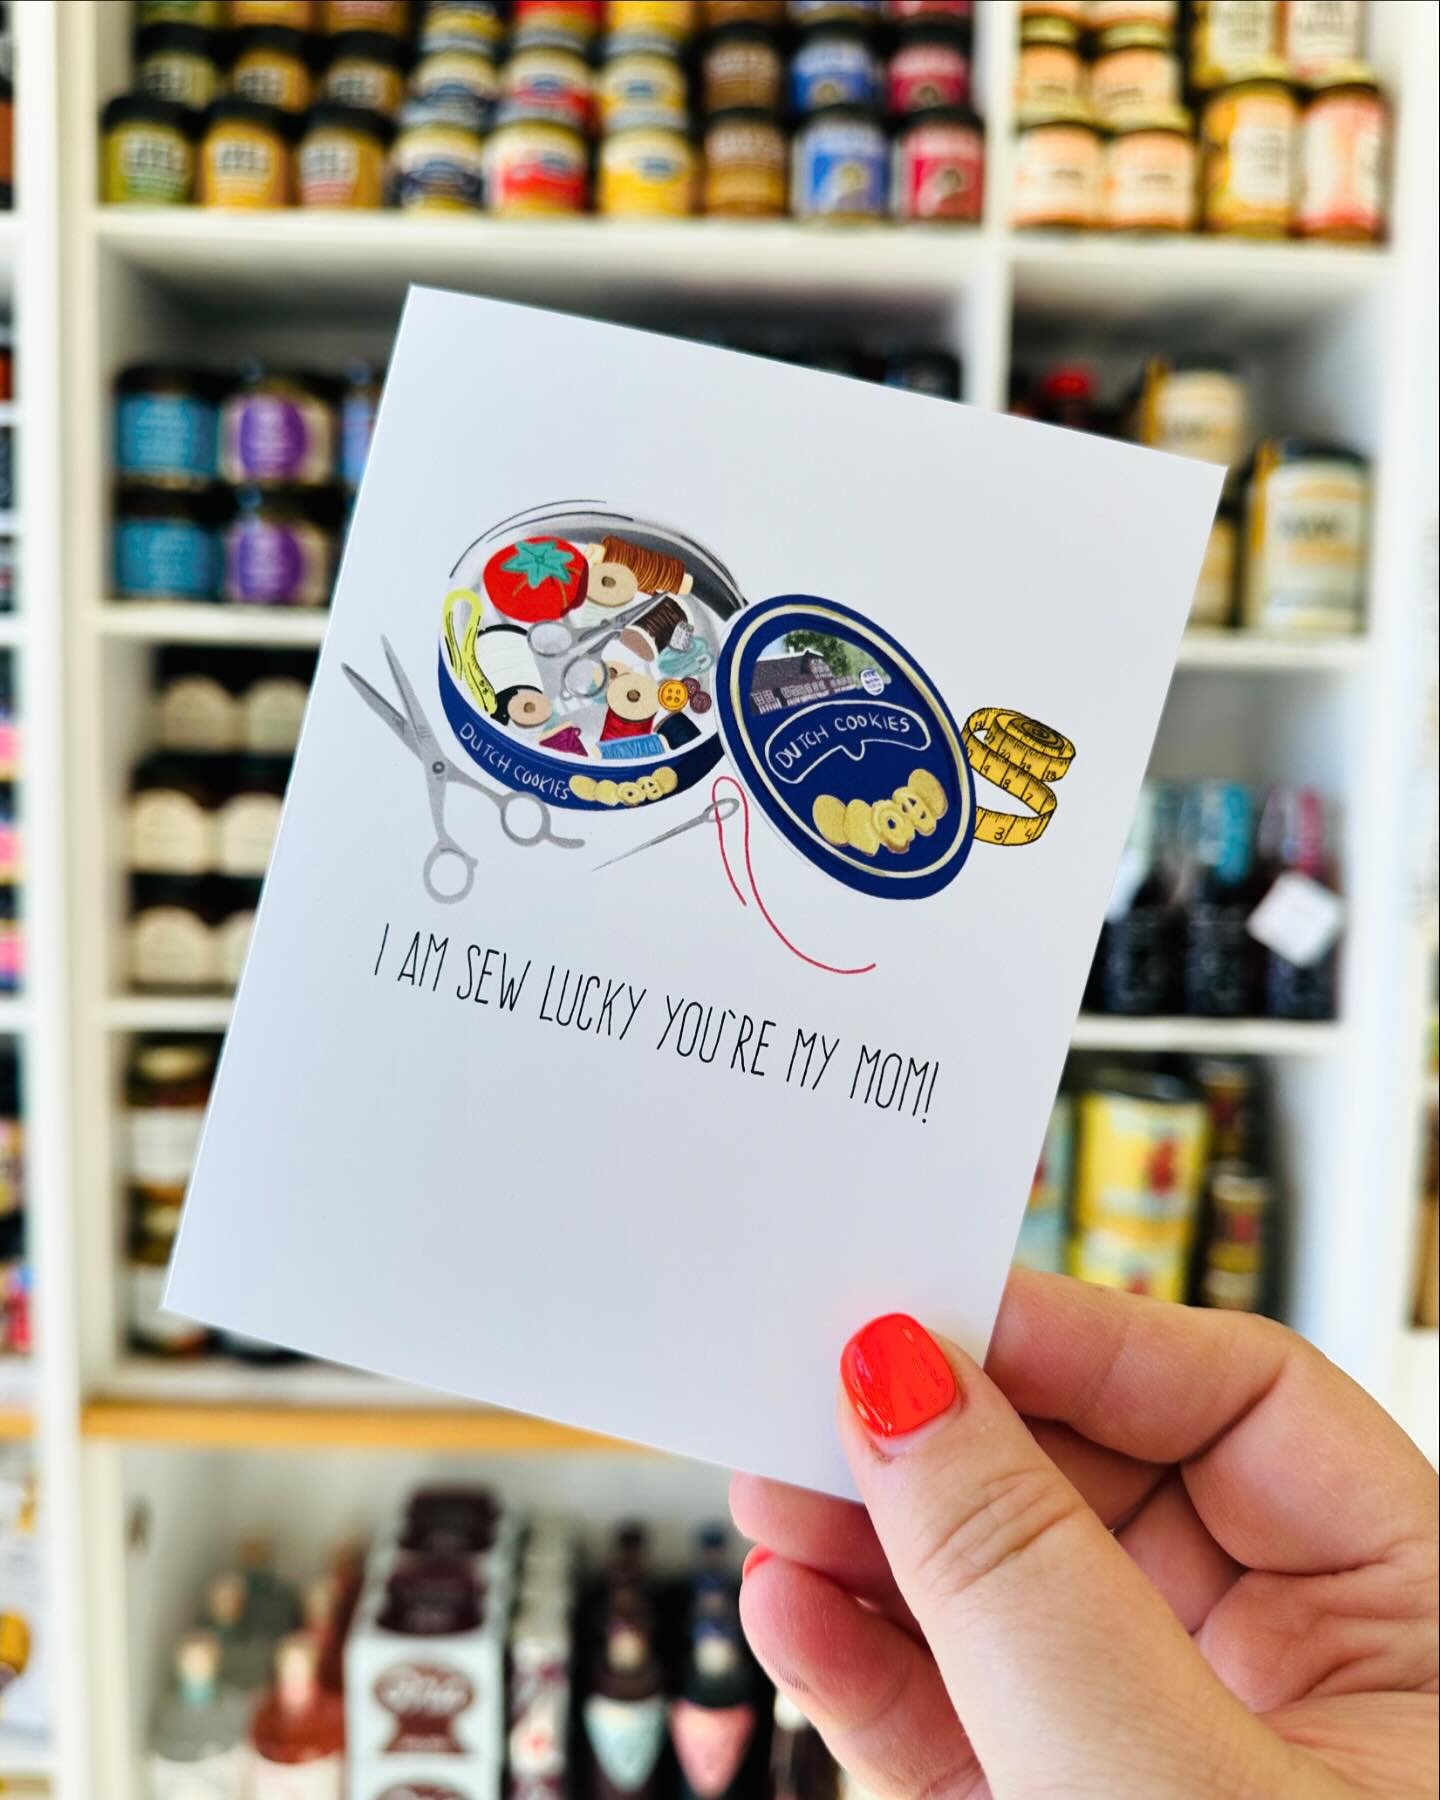 💌💌💌💌💌💌💌
Choosing cards to bring into the shop is one of our fave jobs, and this year&rsquo;s Mother&rsquo;s Day lot is 👌

We&rsquo;ve got cute, funny, on-theme, pretty, plain, en fran&ccedil;ais, and even a few that maybe one .001% of folks m